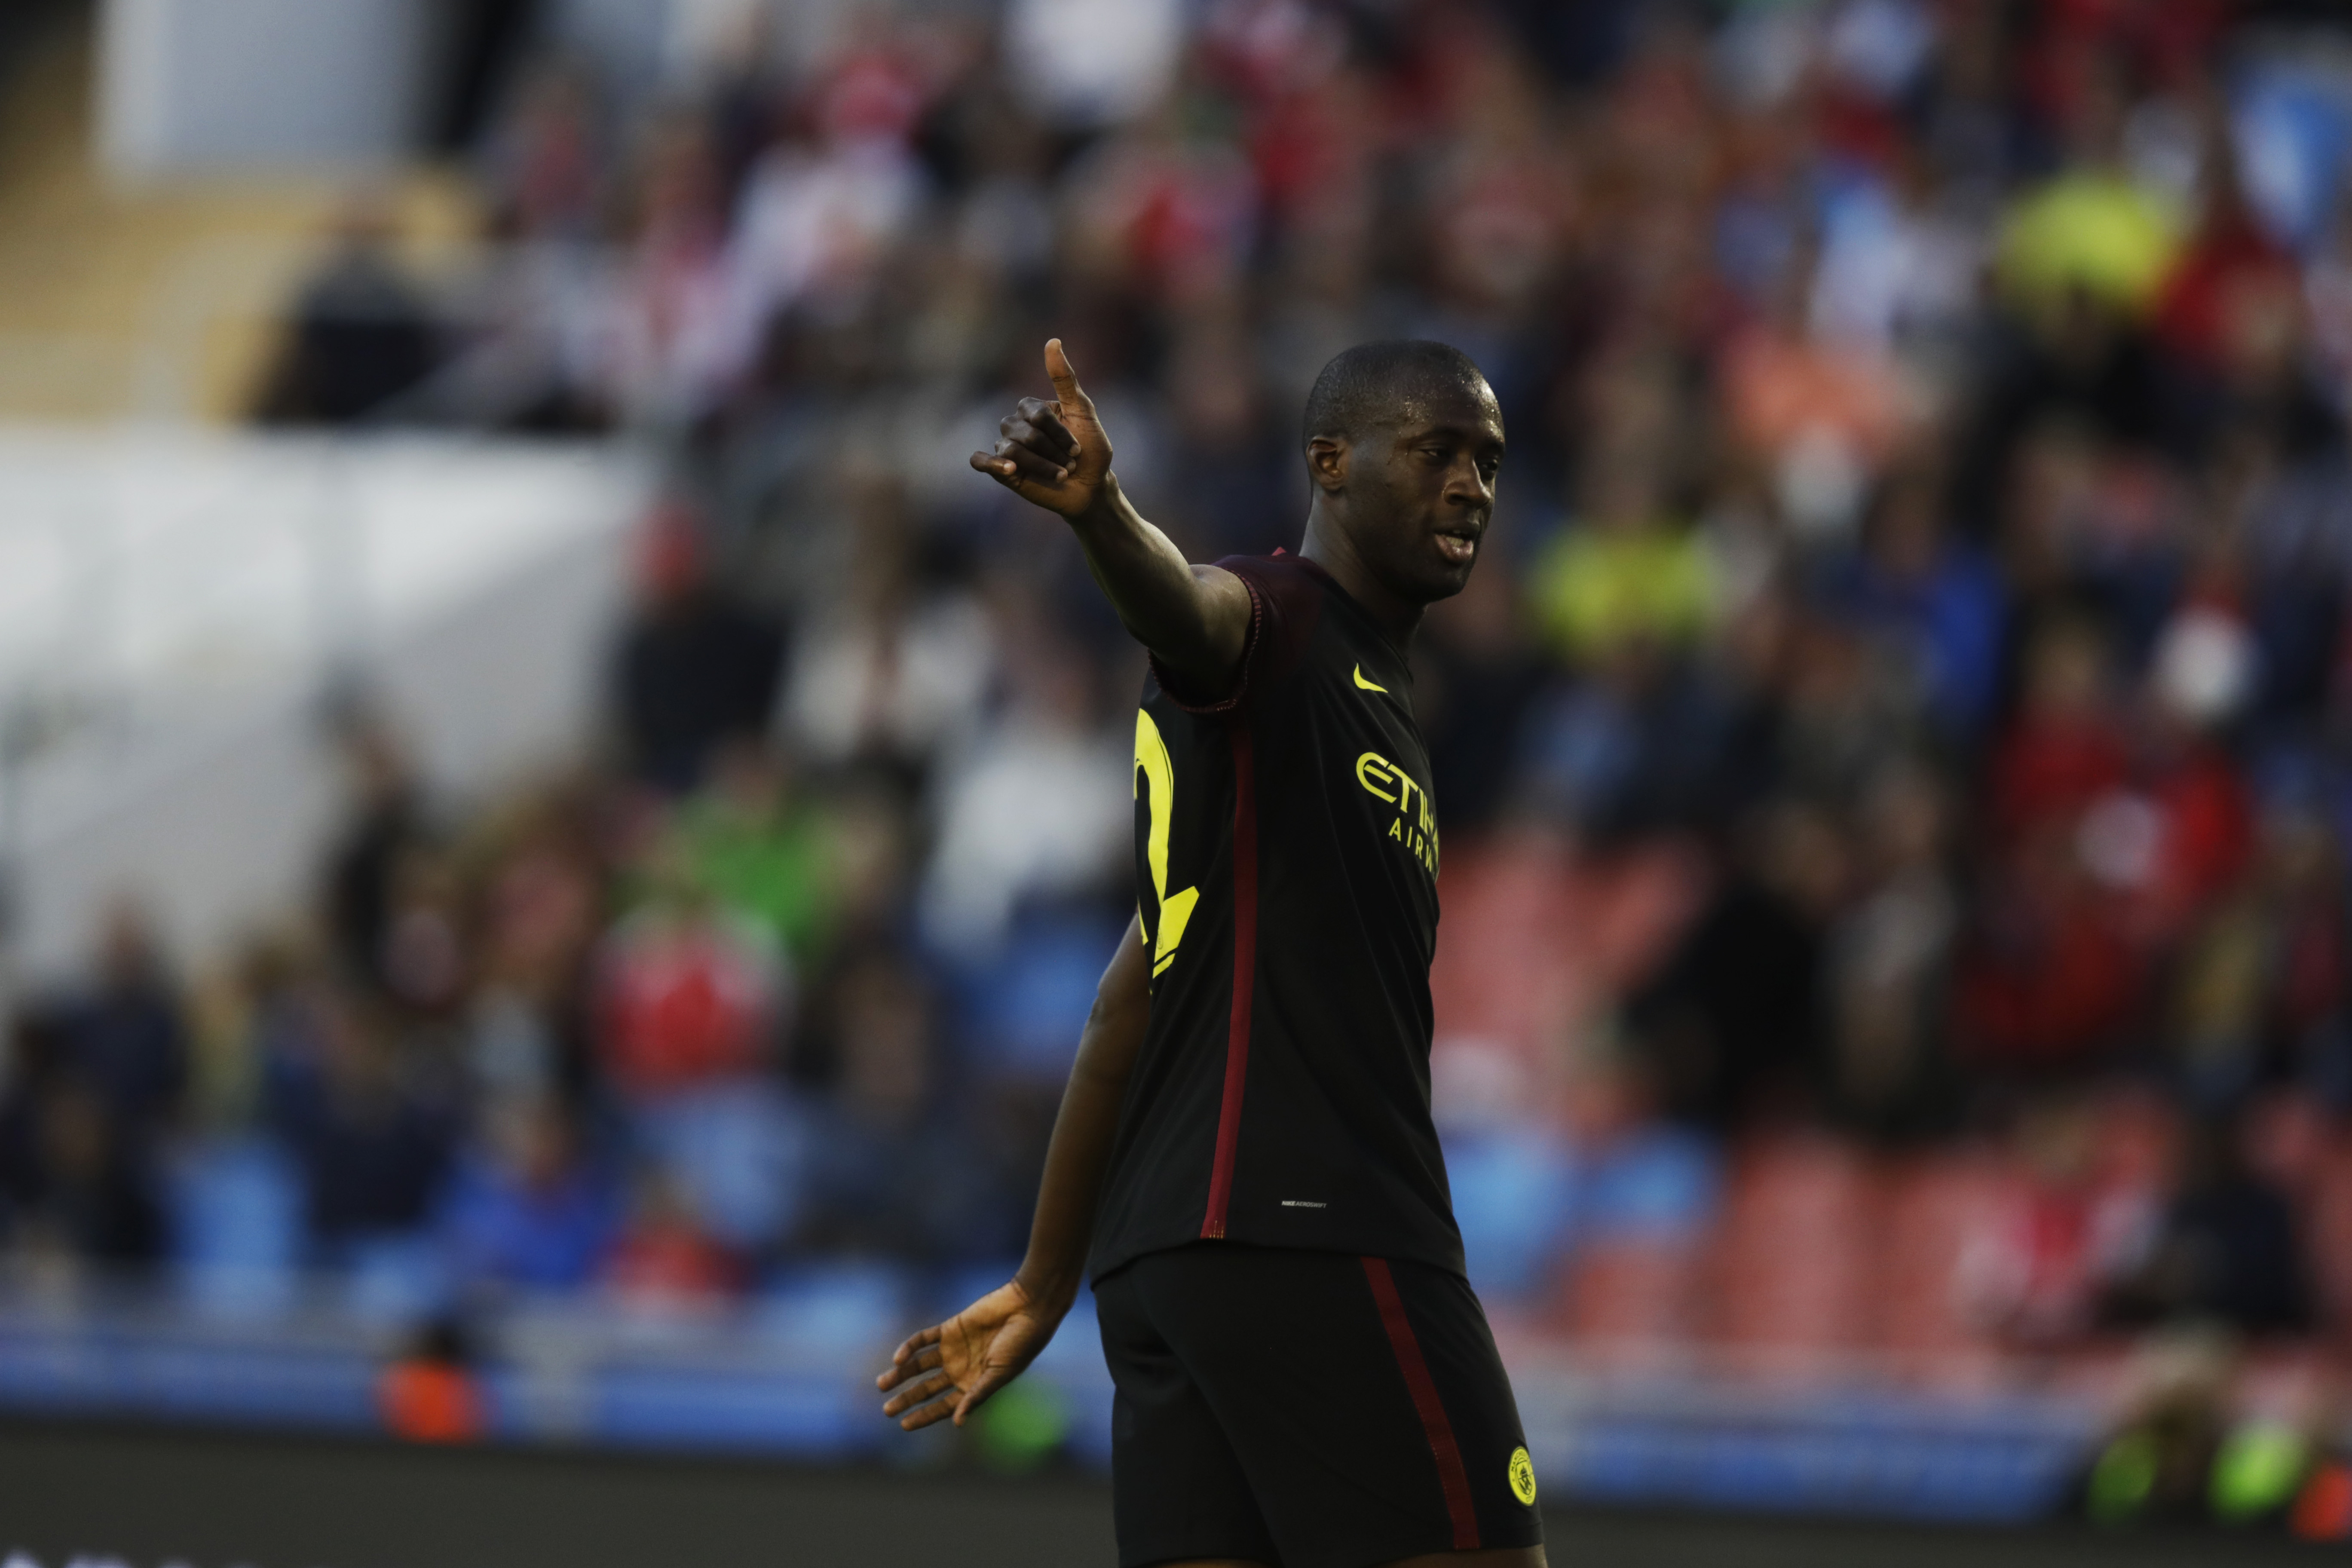 Yaya Toure apologes to Guardiola over agent issue